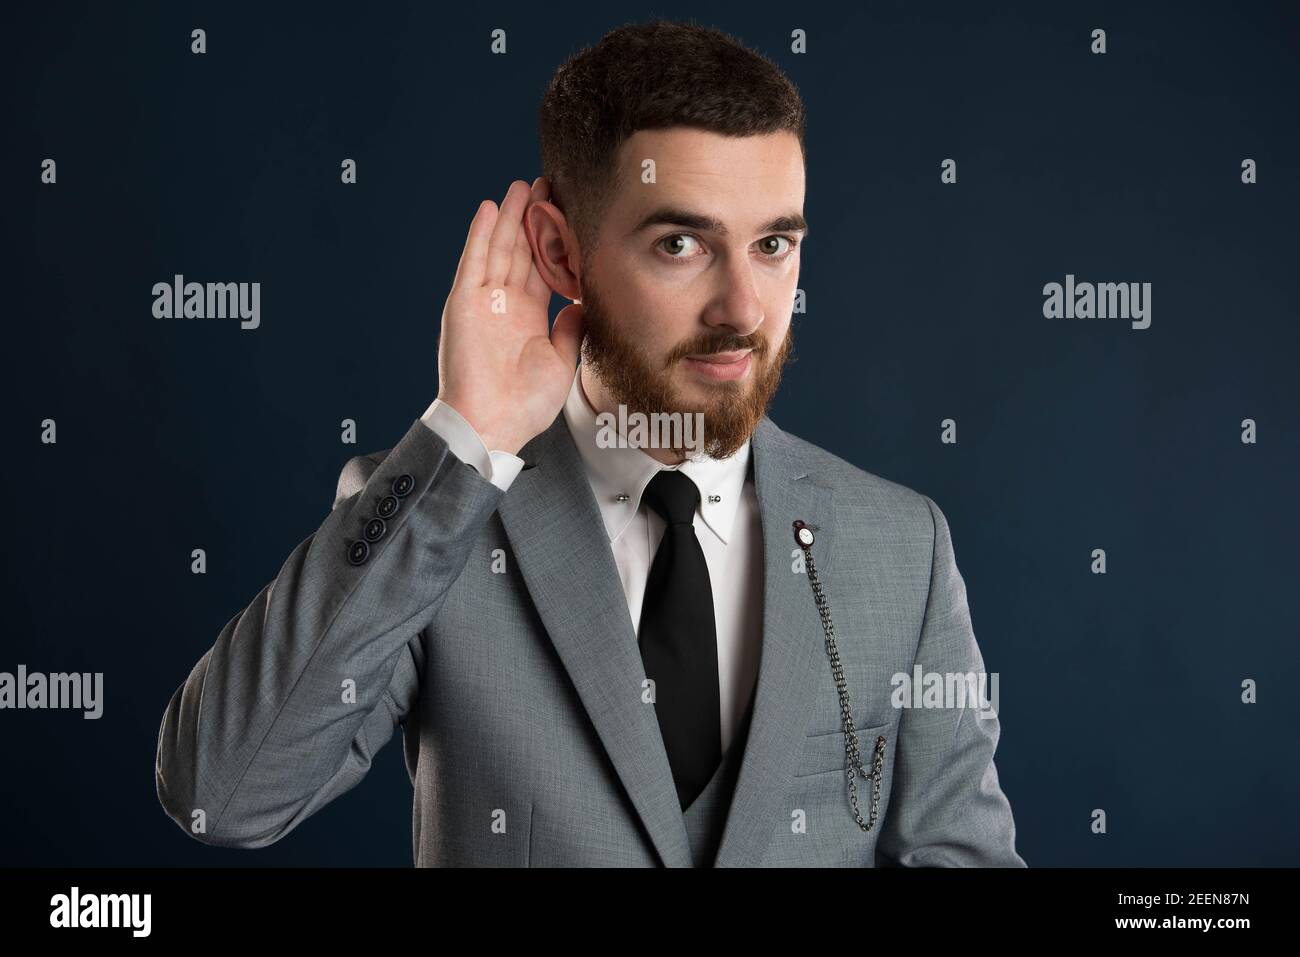 Young adult businessman listening to what you are saying wearing a grey suit and black tie Stock Photo